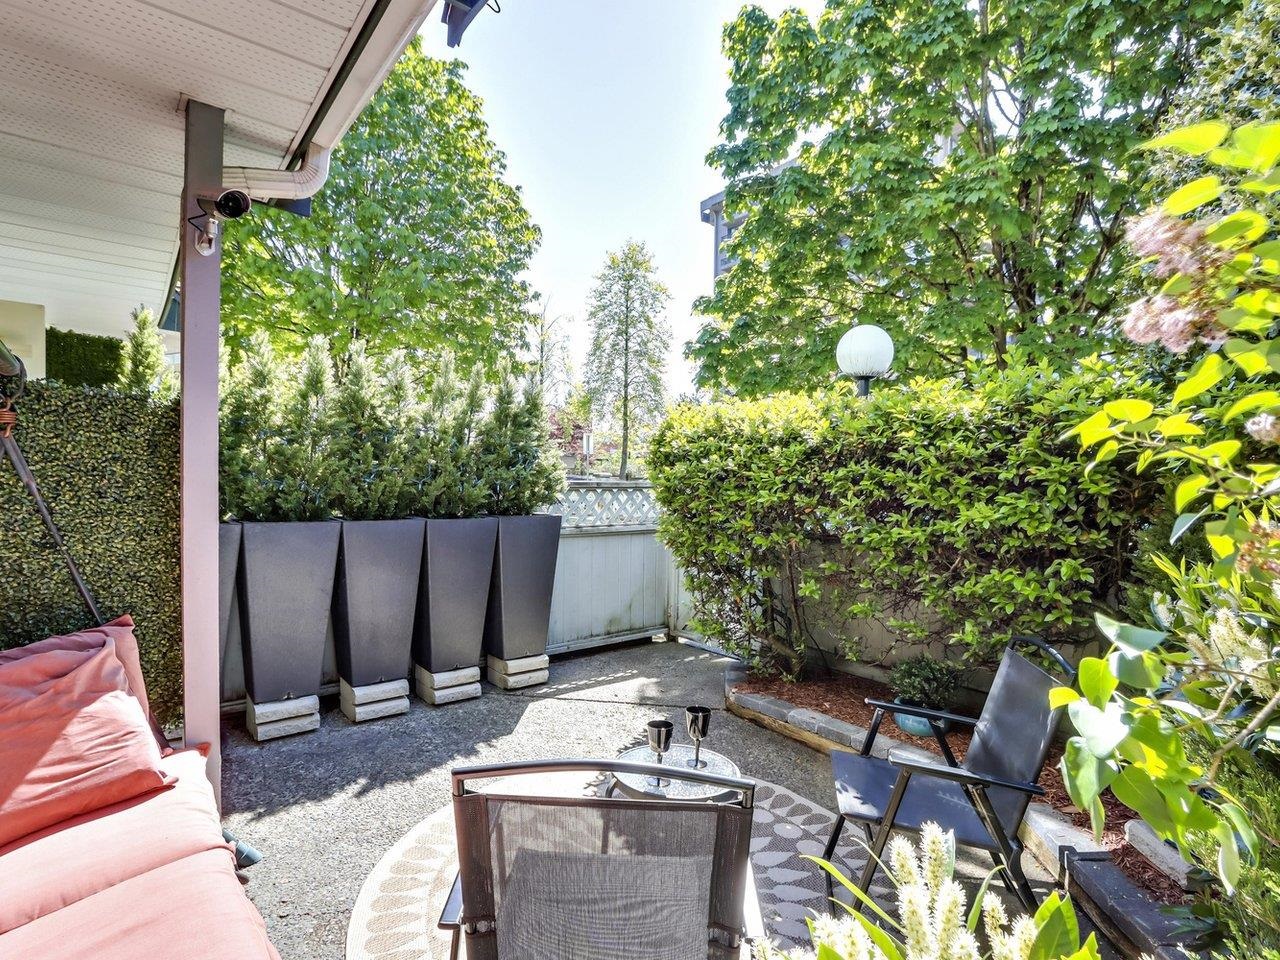 Vancouver Heights Apartment/Condo for sale:  1 bedroom 556 sq.ft. (Listed 3600-05-19)